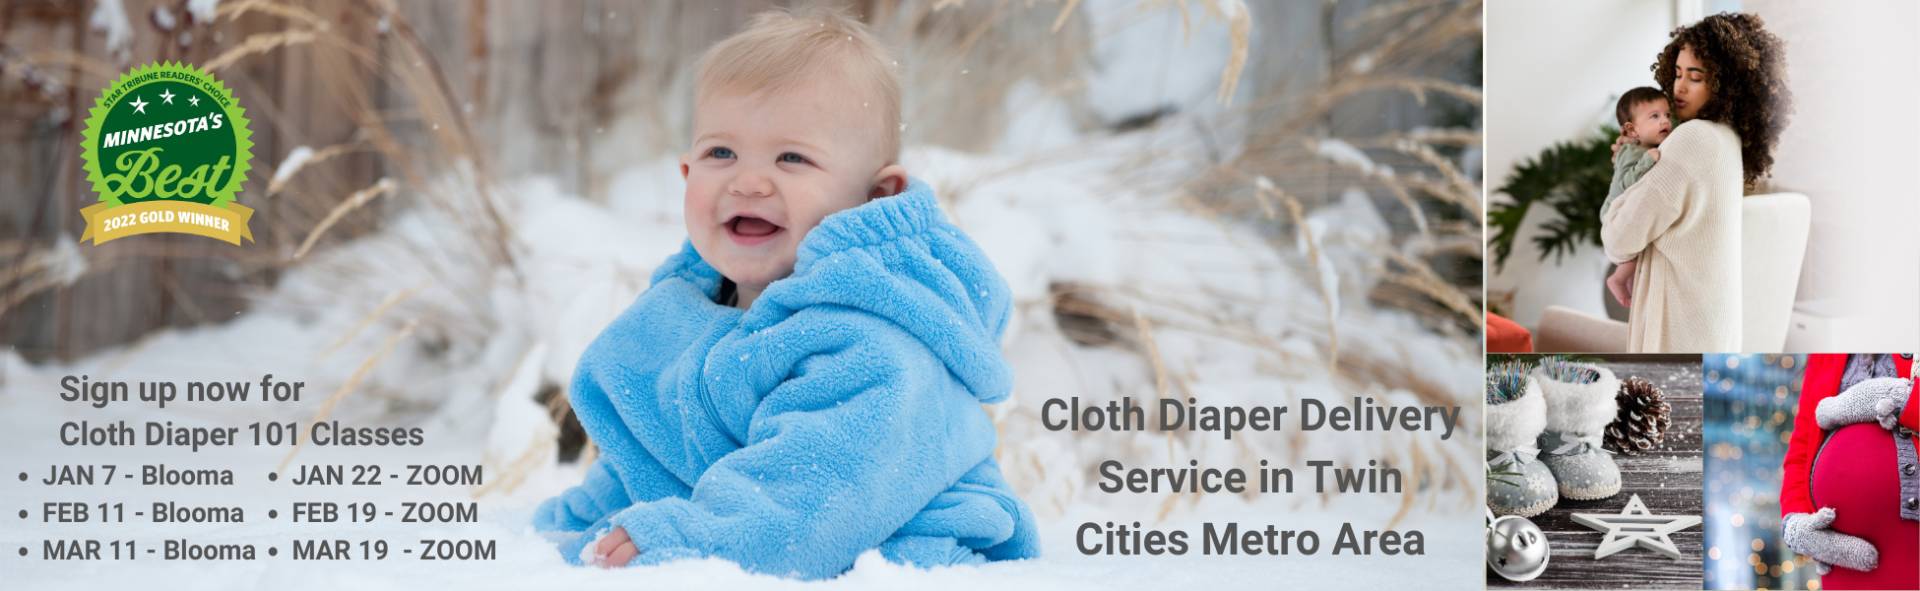 January, February, and March events with Do Good Diaper Service